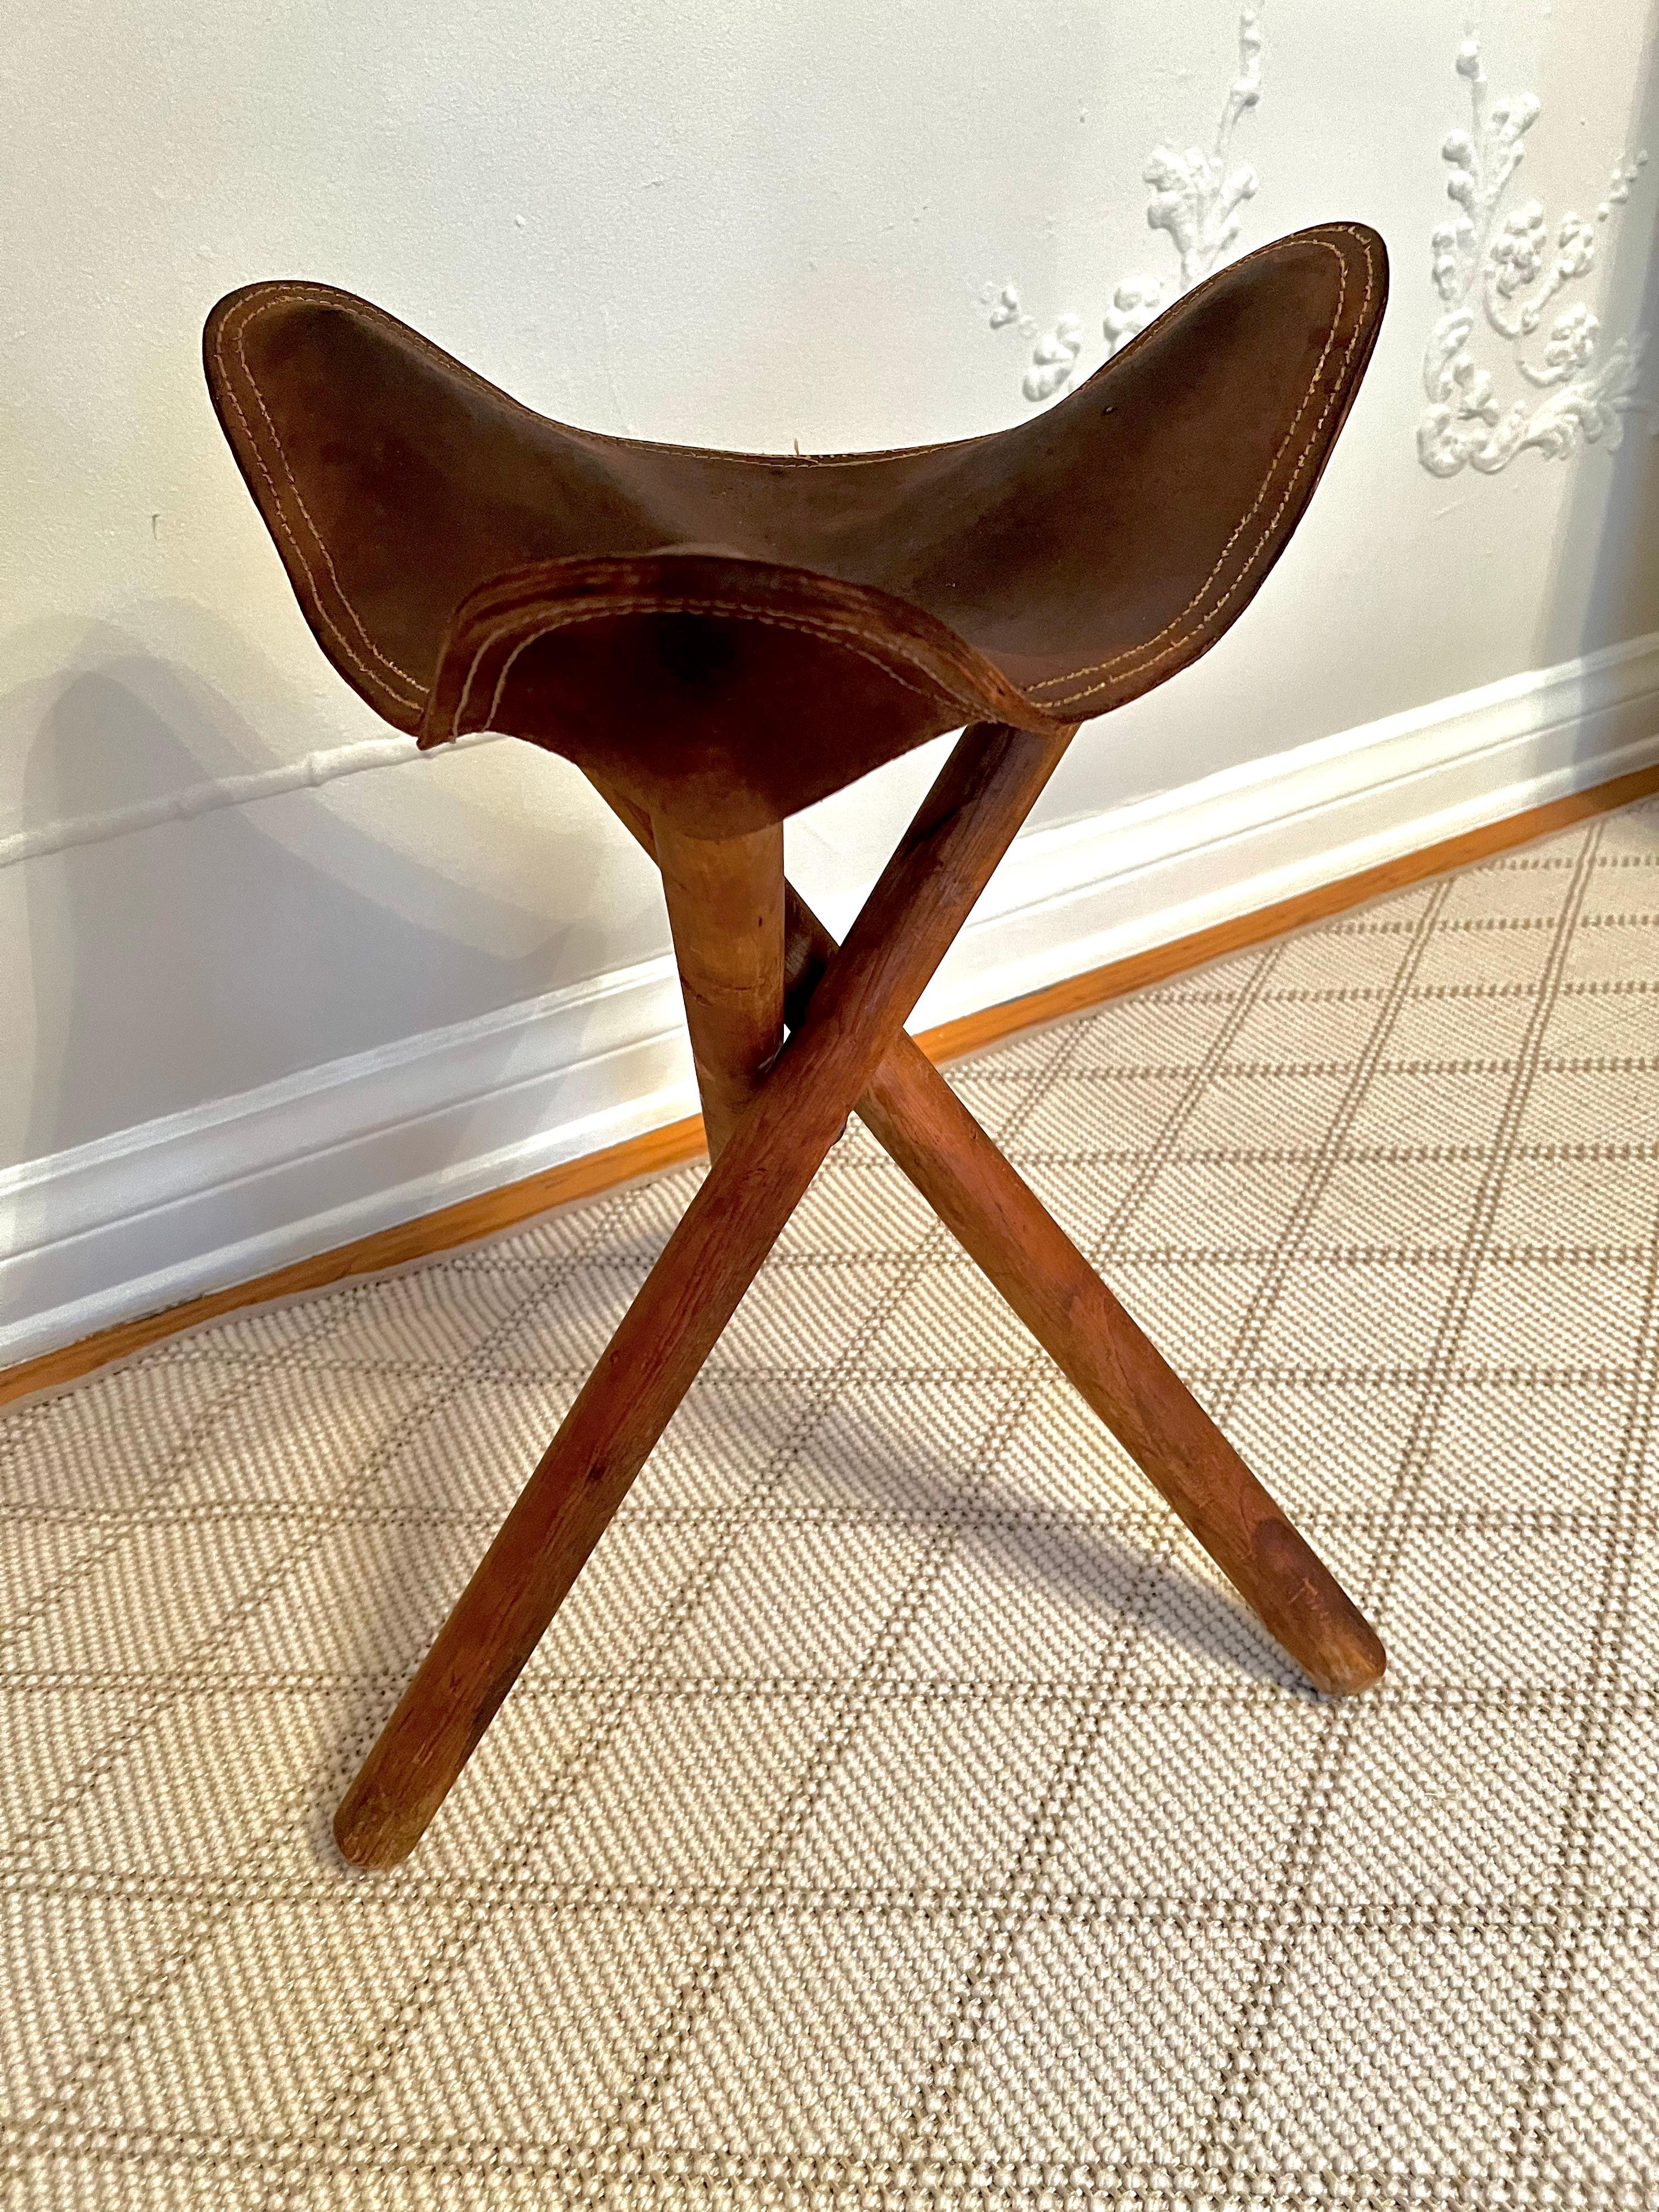 20th Century Tipod Leg Wooden Stool with Leather Seat